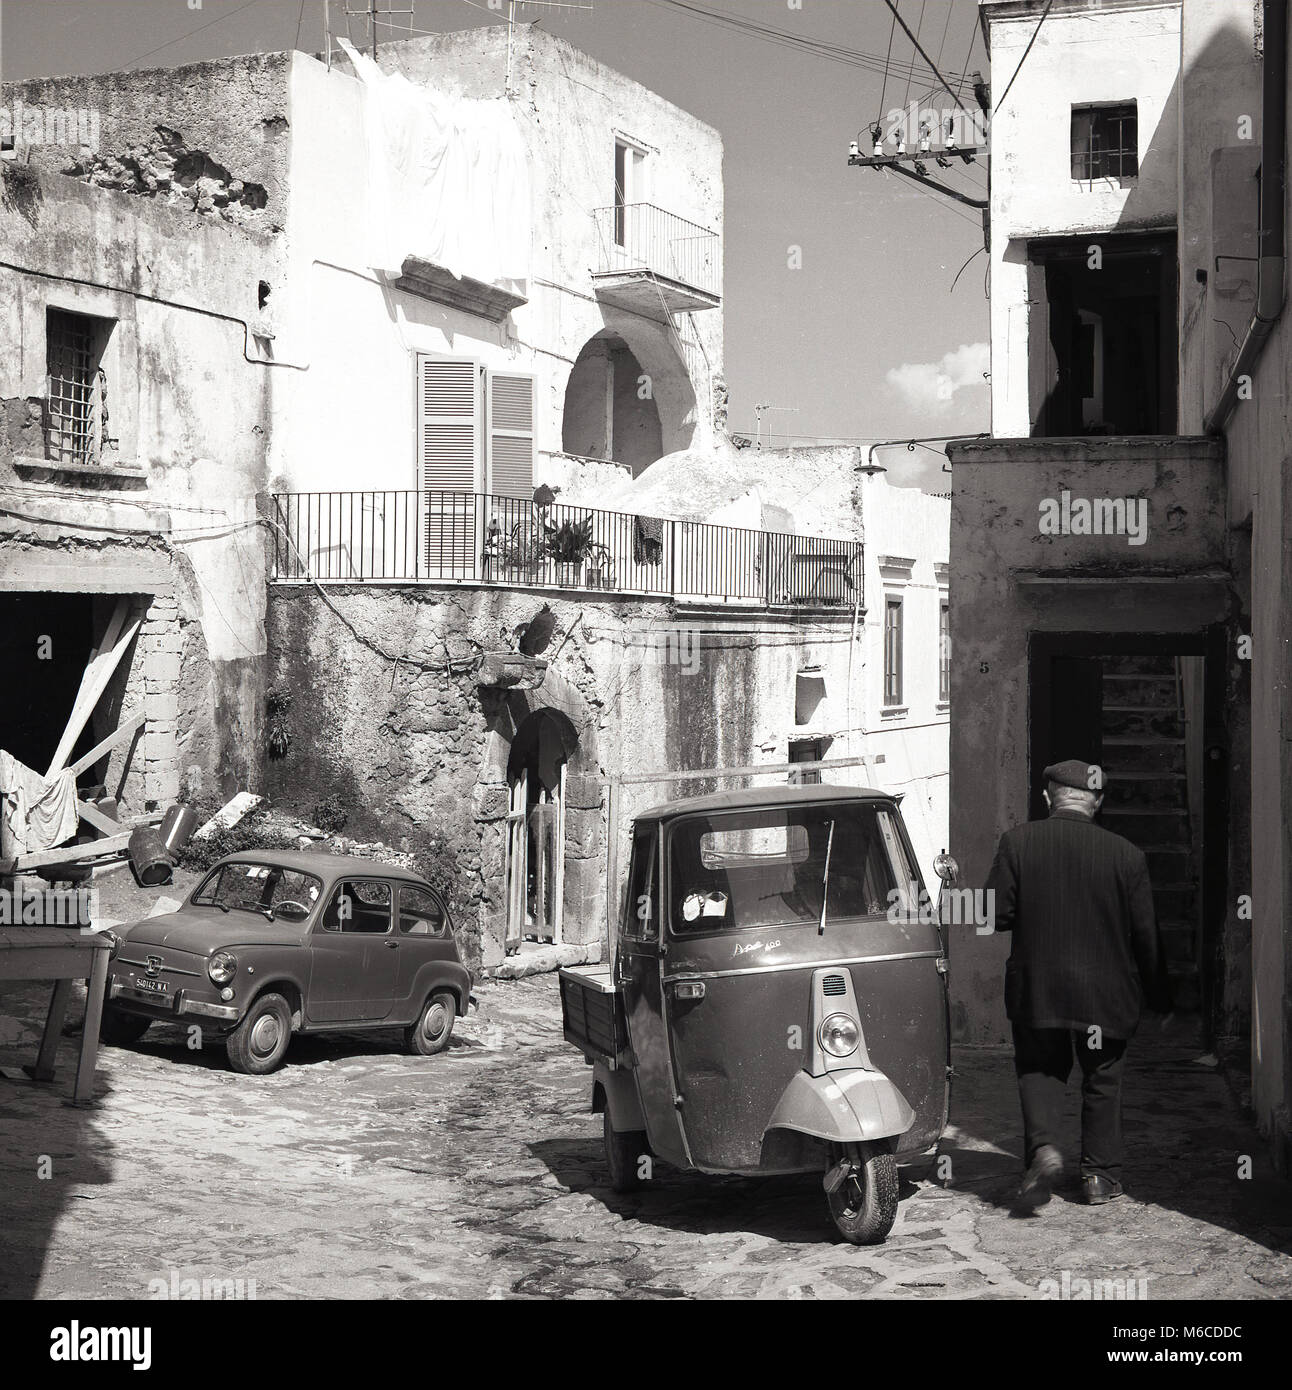 1950s, historical, summertime and a tight narrow sidestreet with Italian  vehicles of the era, a small fiat 'bubble car' and a 'vespaCar', a  three-wheeled delivery van, a Piaggio Ape 400, parked on